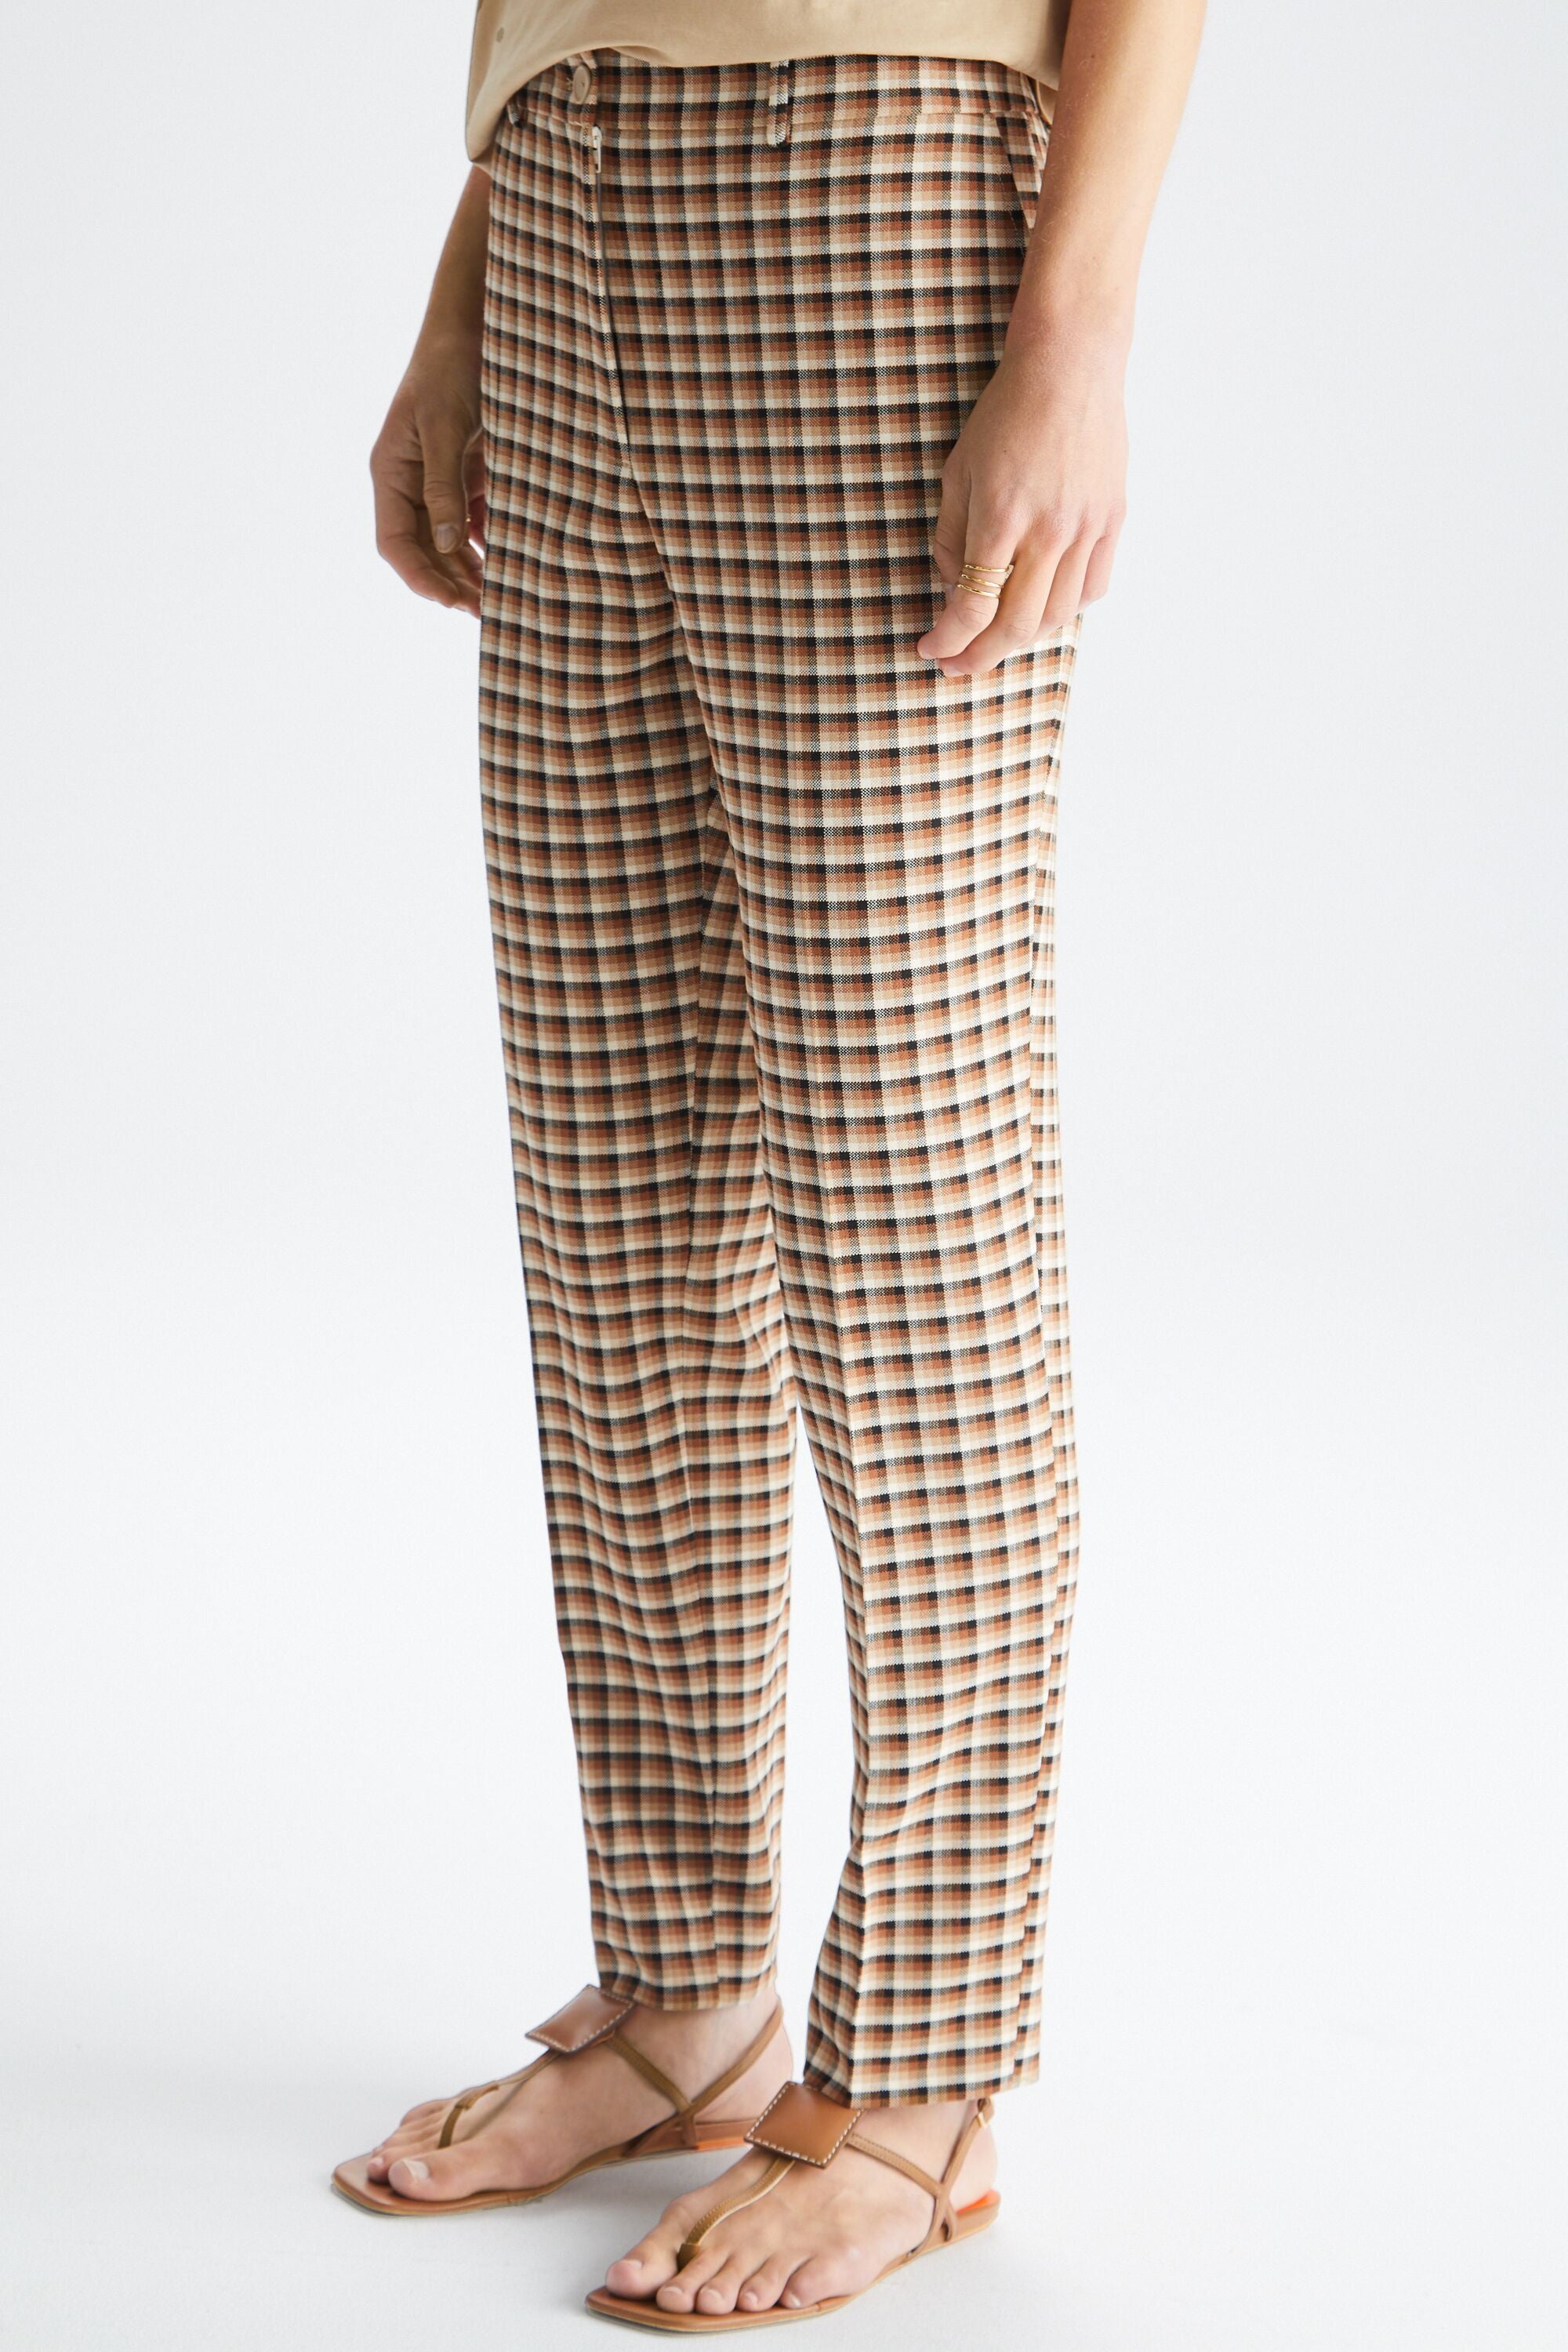 Windsor Pull Up In Plaid Mid Rise Skinny Trousers | CoolSprings Galleria